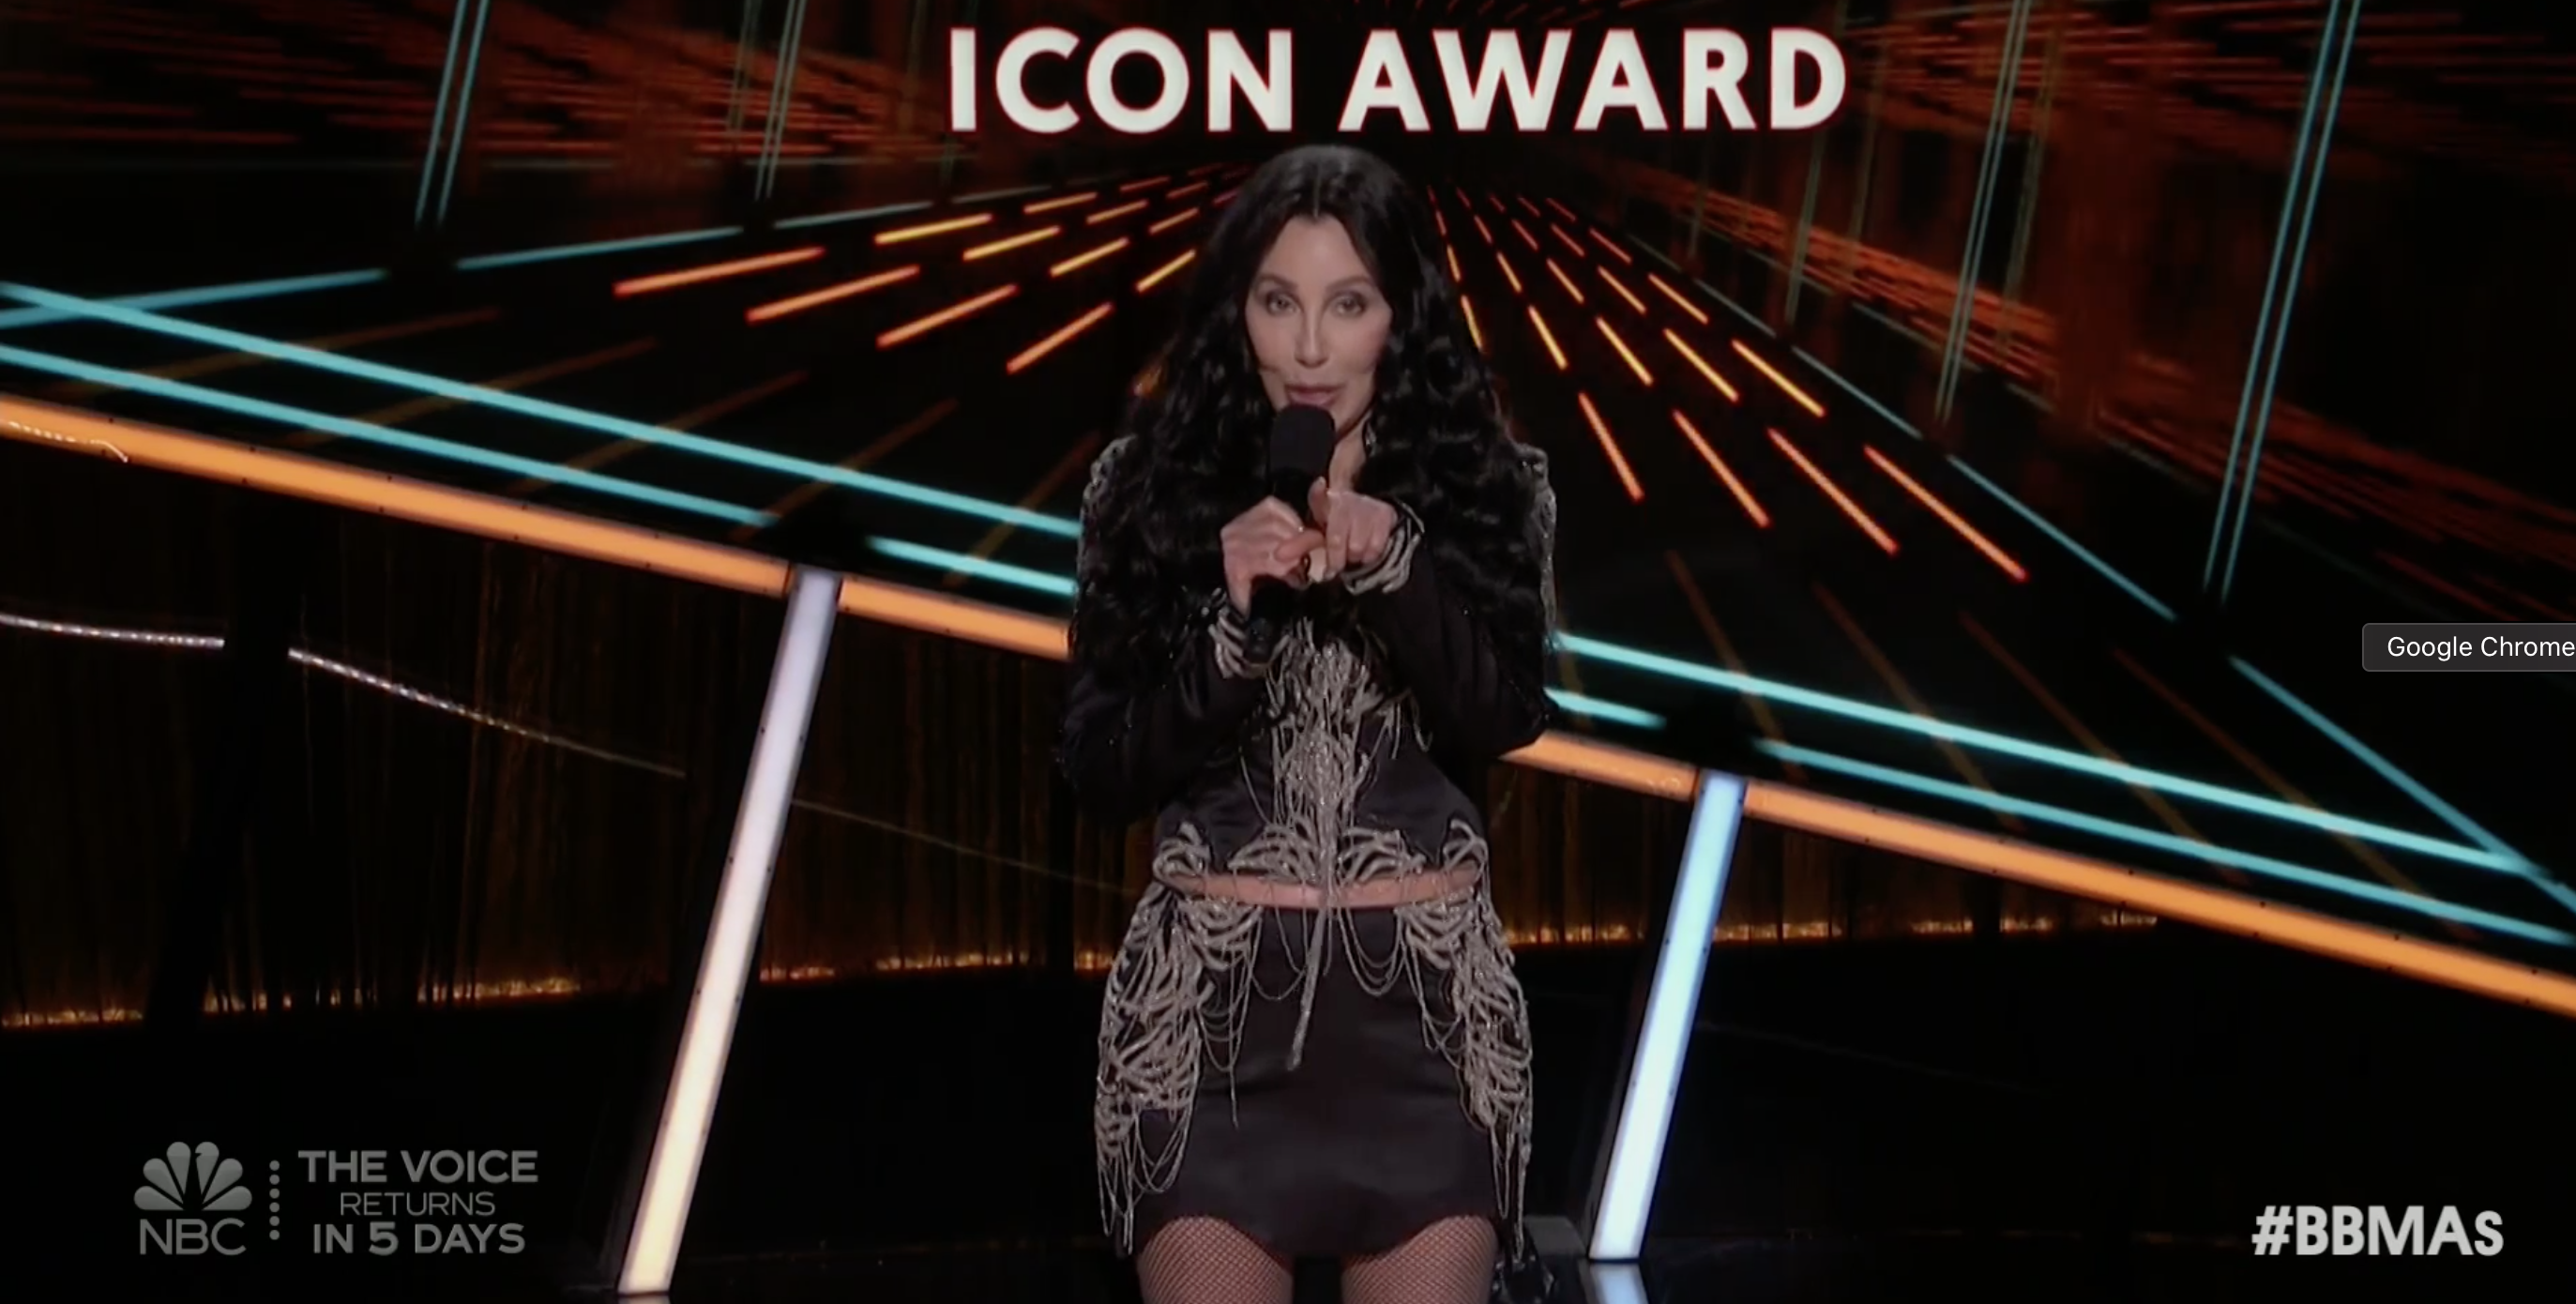 Cher at the 2020 Billboard Music Awards